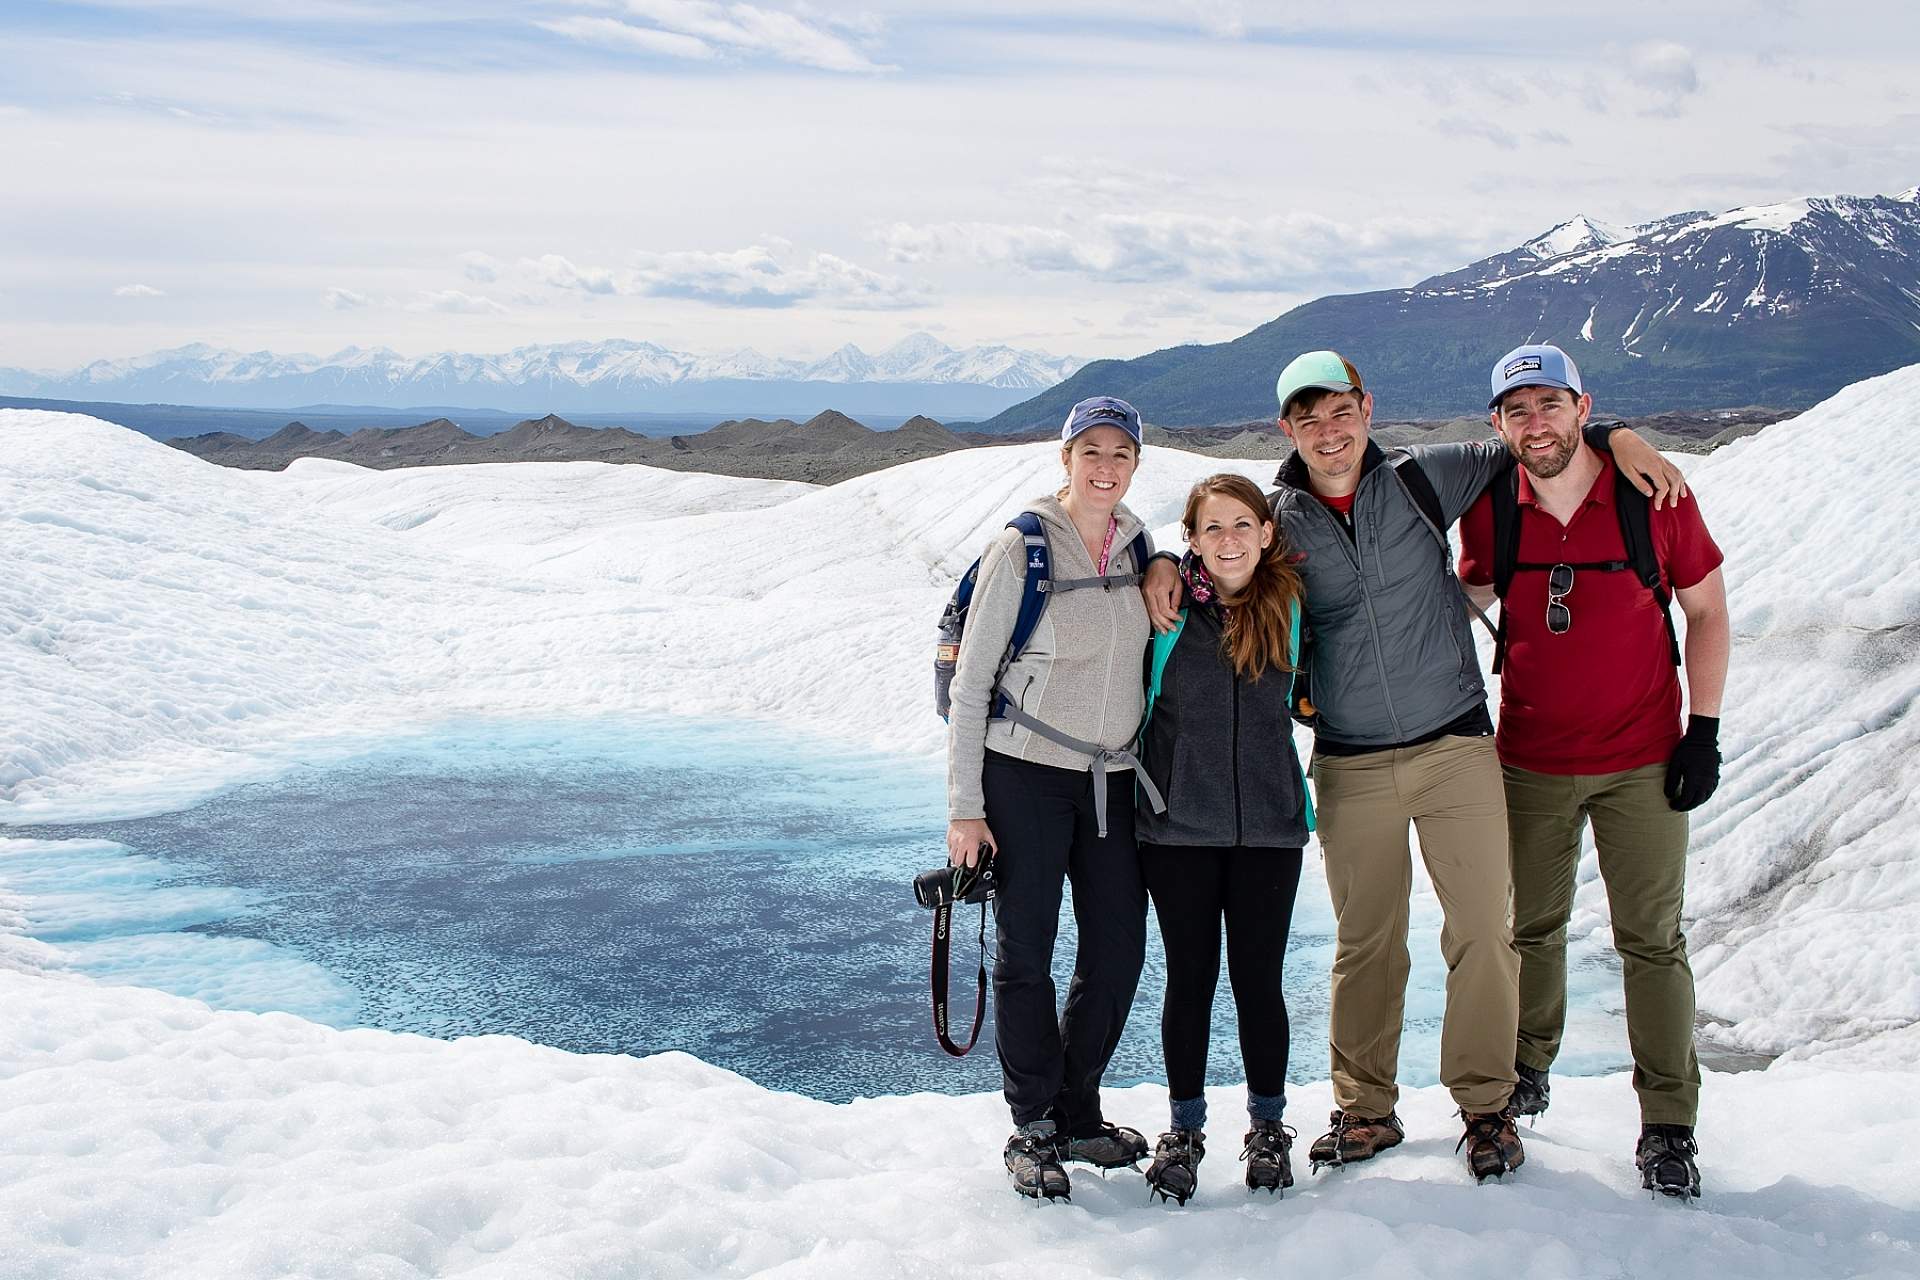 Alexyn and friends stand on the Root Glacier in Wrangell St. Elias National Park